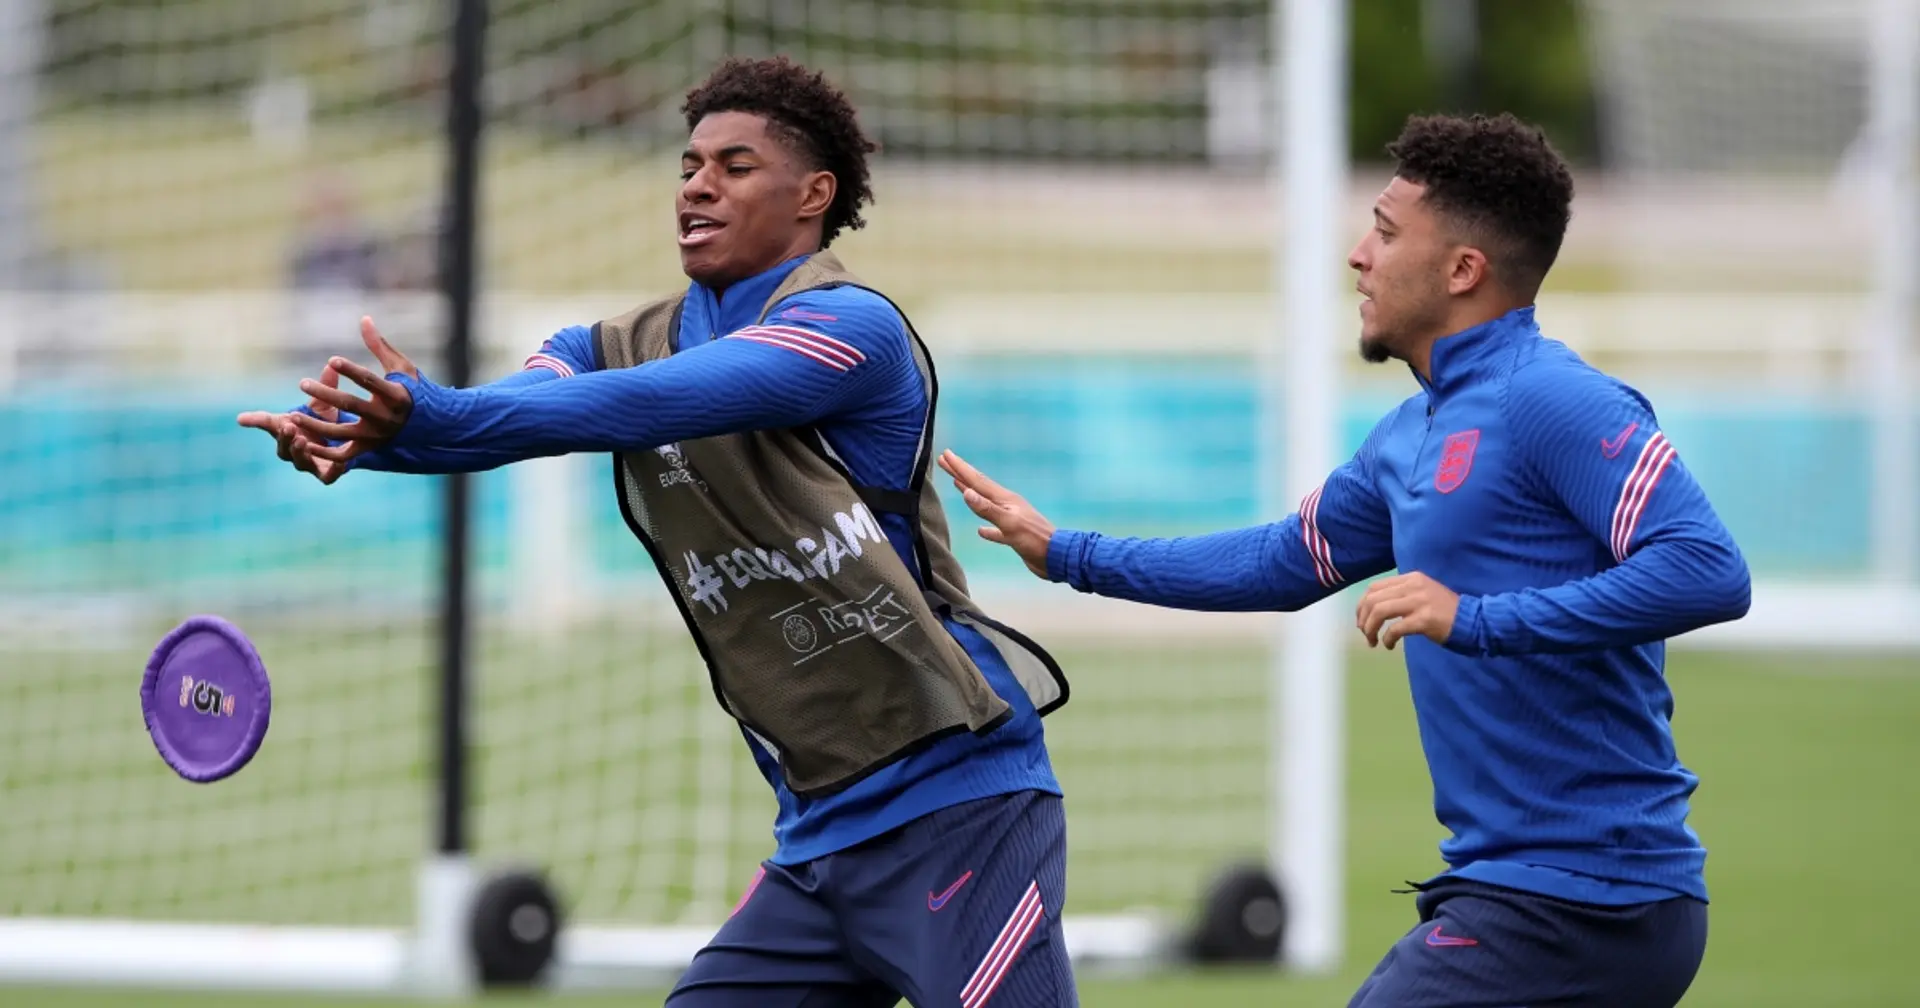 Explained: how Jadon Sancho's bromance with Marcus Rashford helped seal Man United move